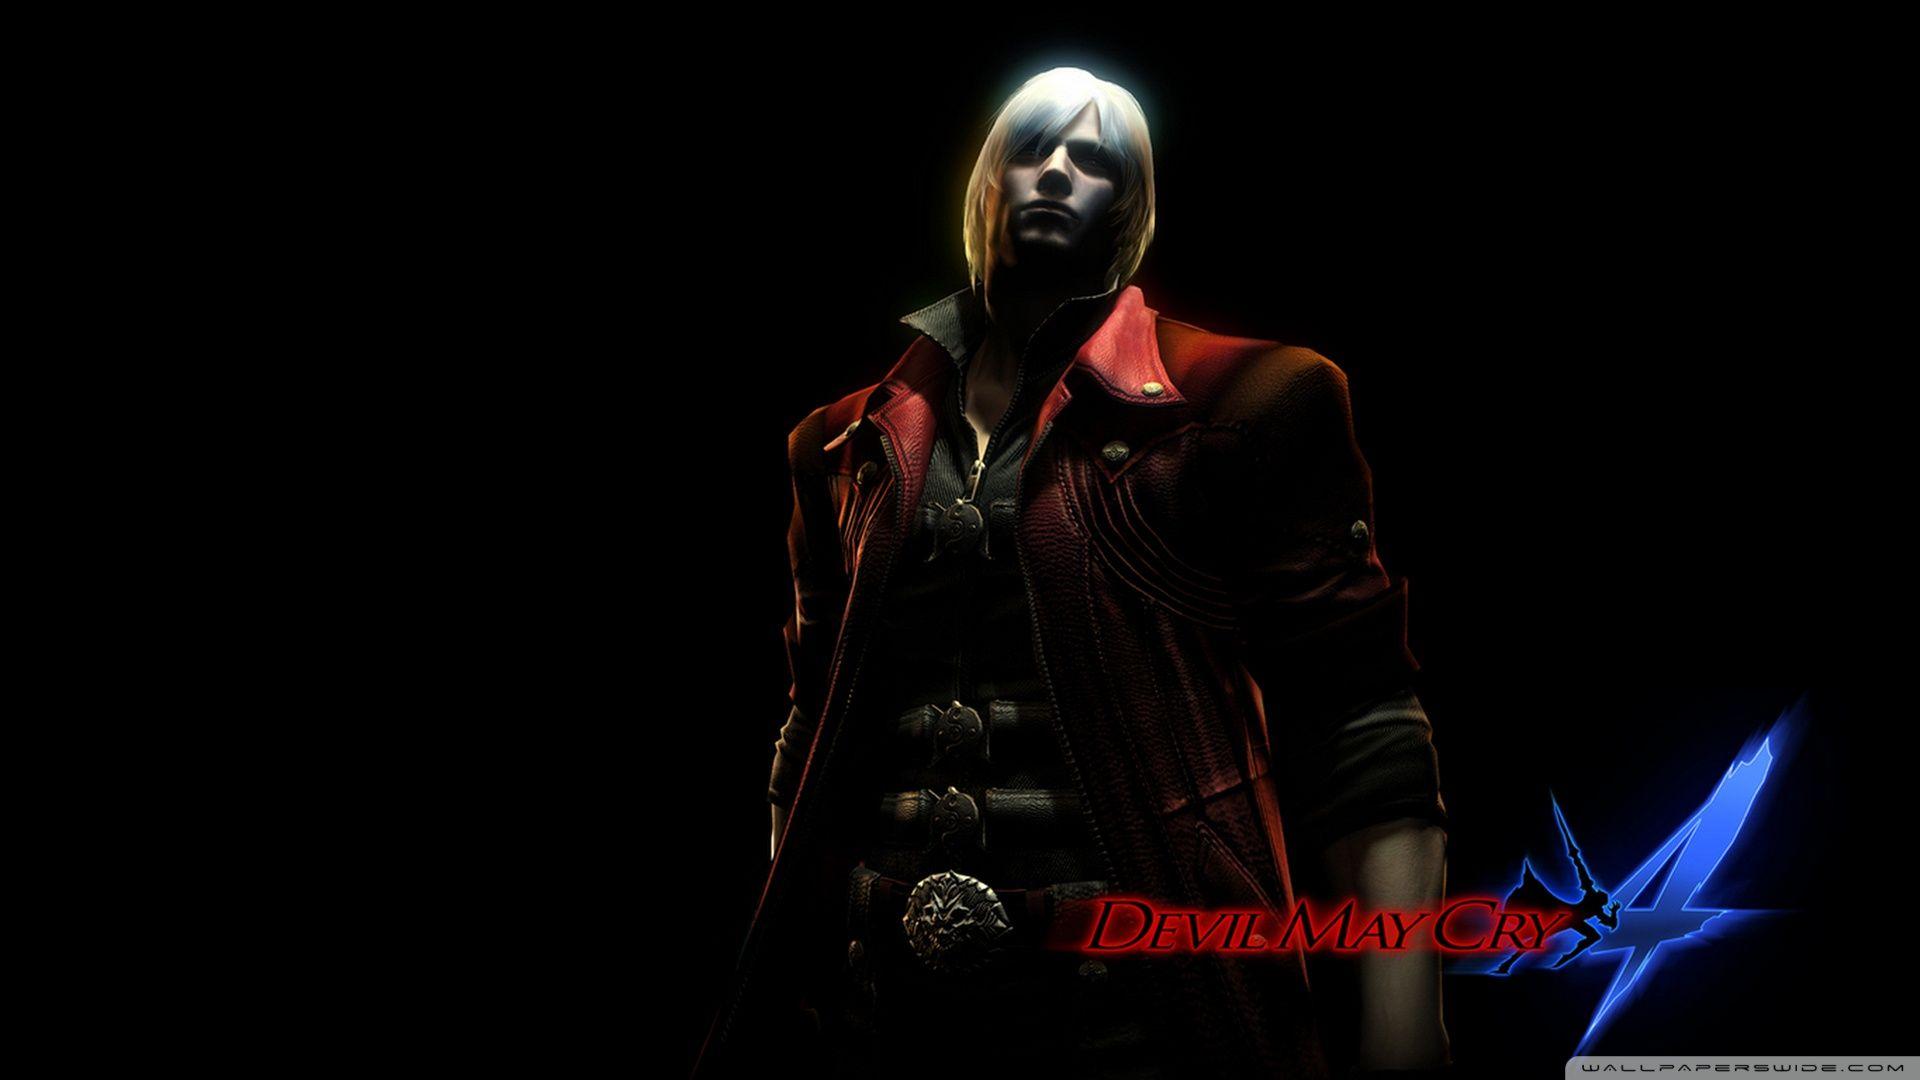 Devil May Cry 4 Full Hd Wallpapers Wallpaper Cave